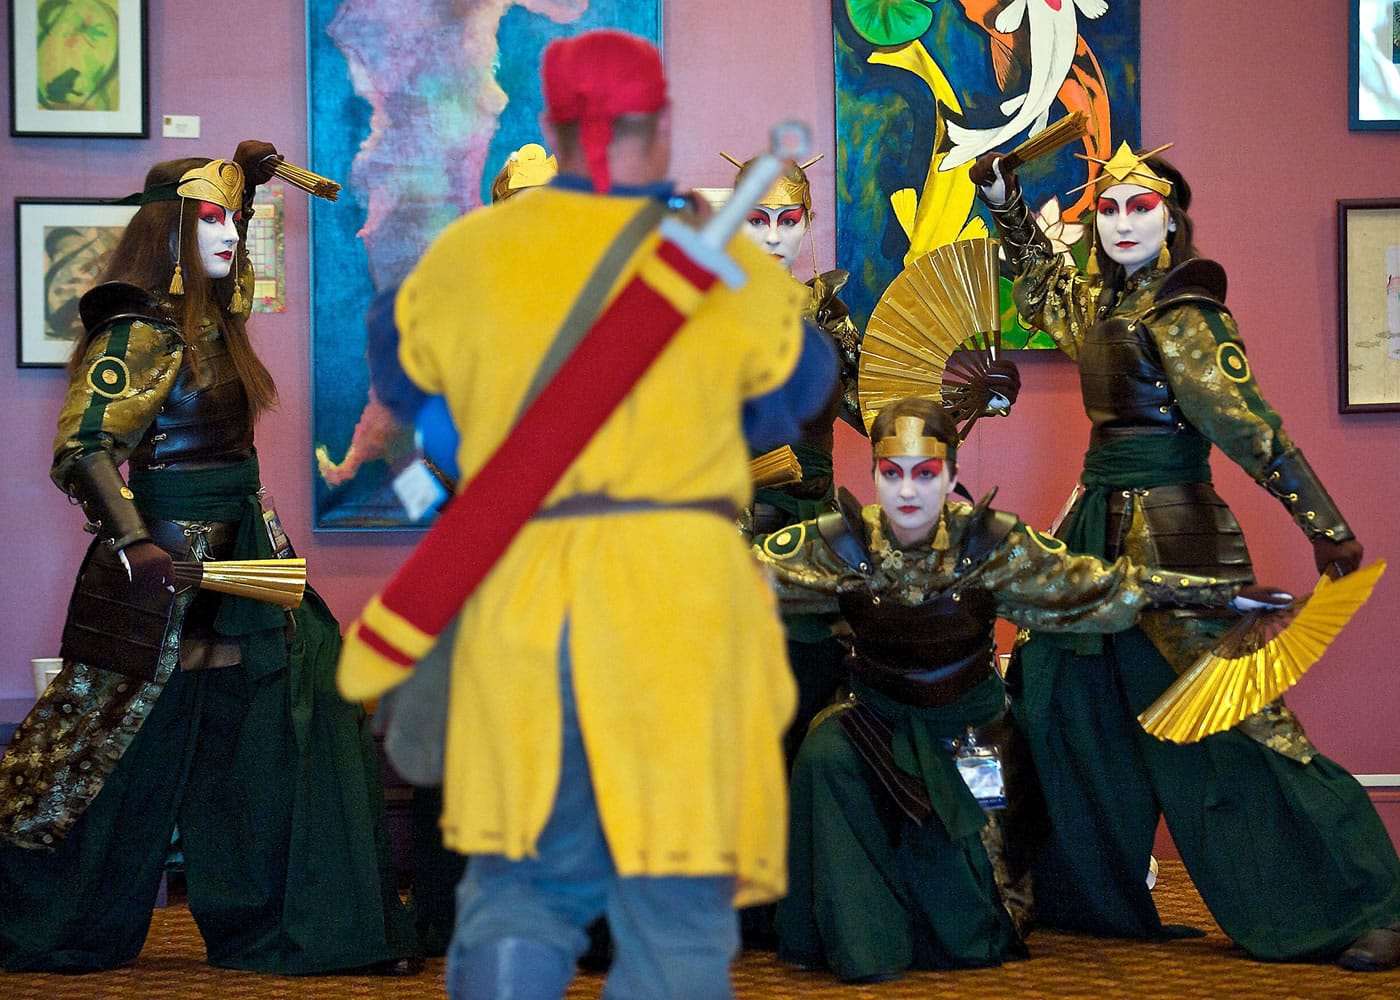 These Kumoricon players from Salem, Ore., dressed as Kyoshi Warriors from the Nickelodeon series &quot;Avatar: The Last Airbender,&quot; were repeatedly asked to pose Sunday.